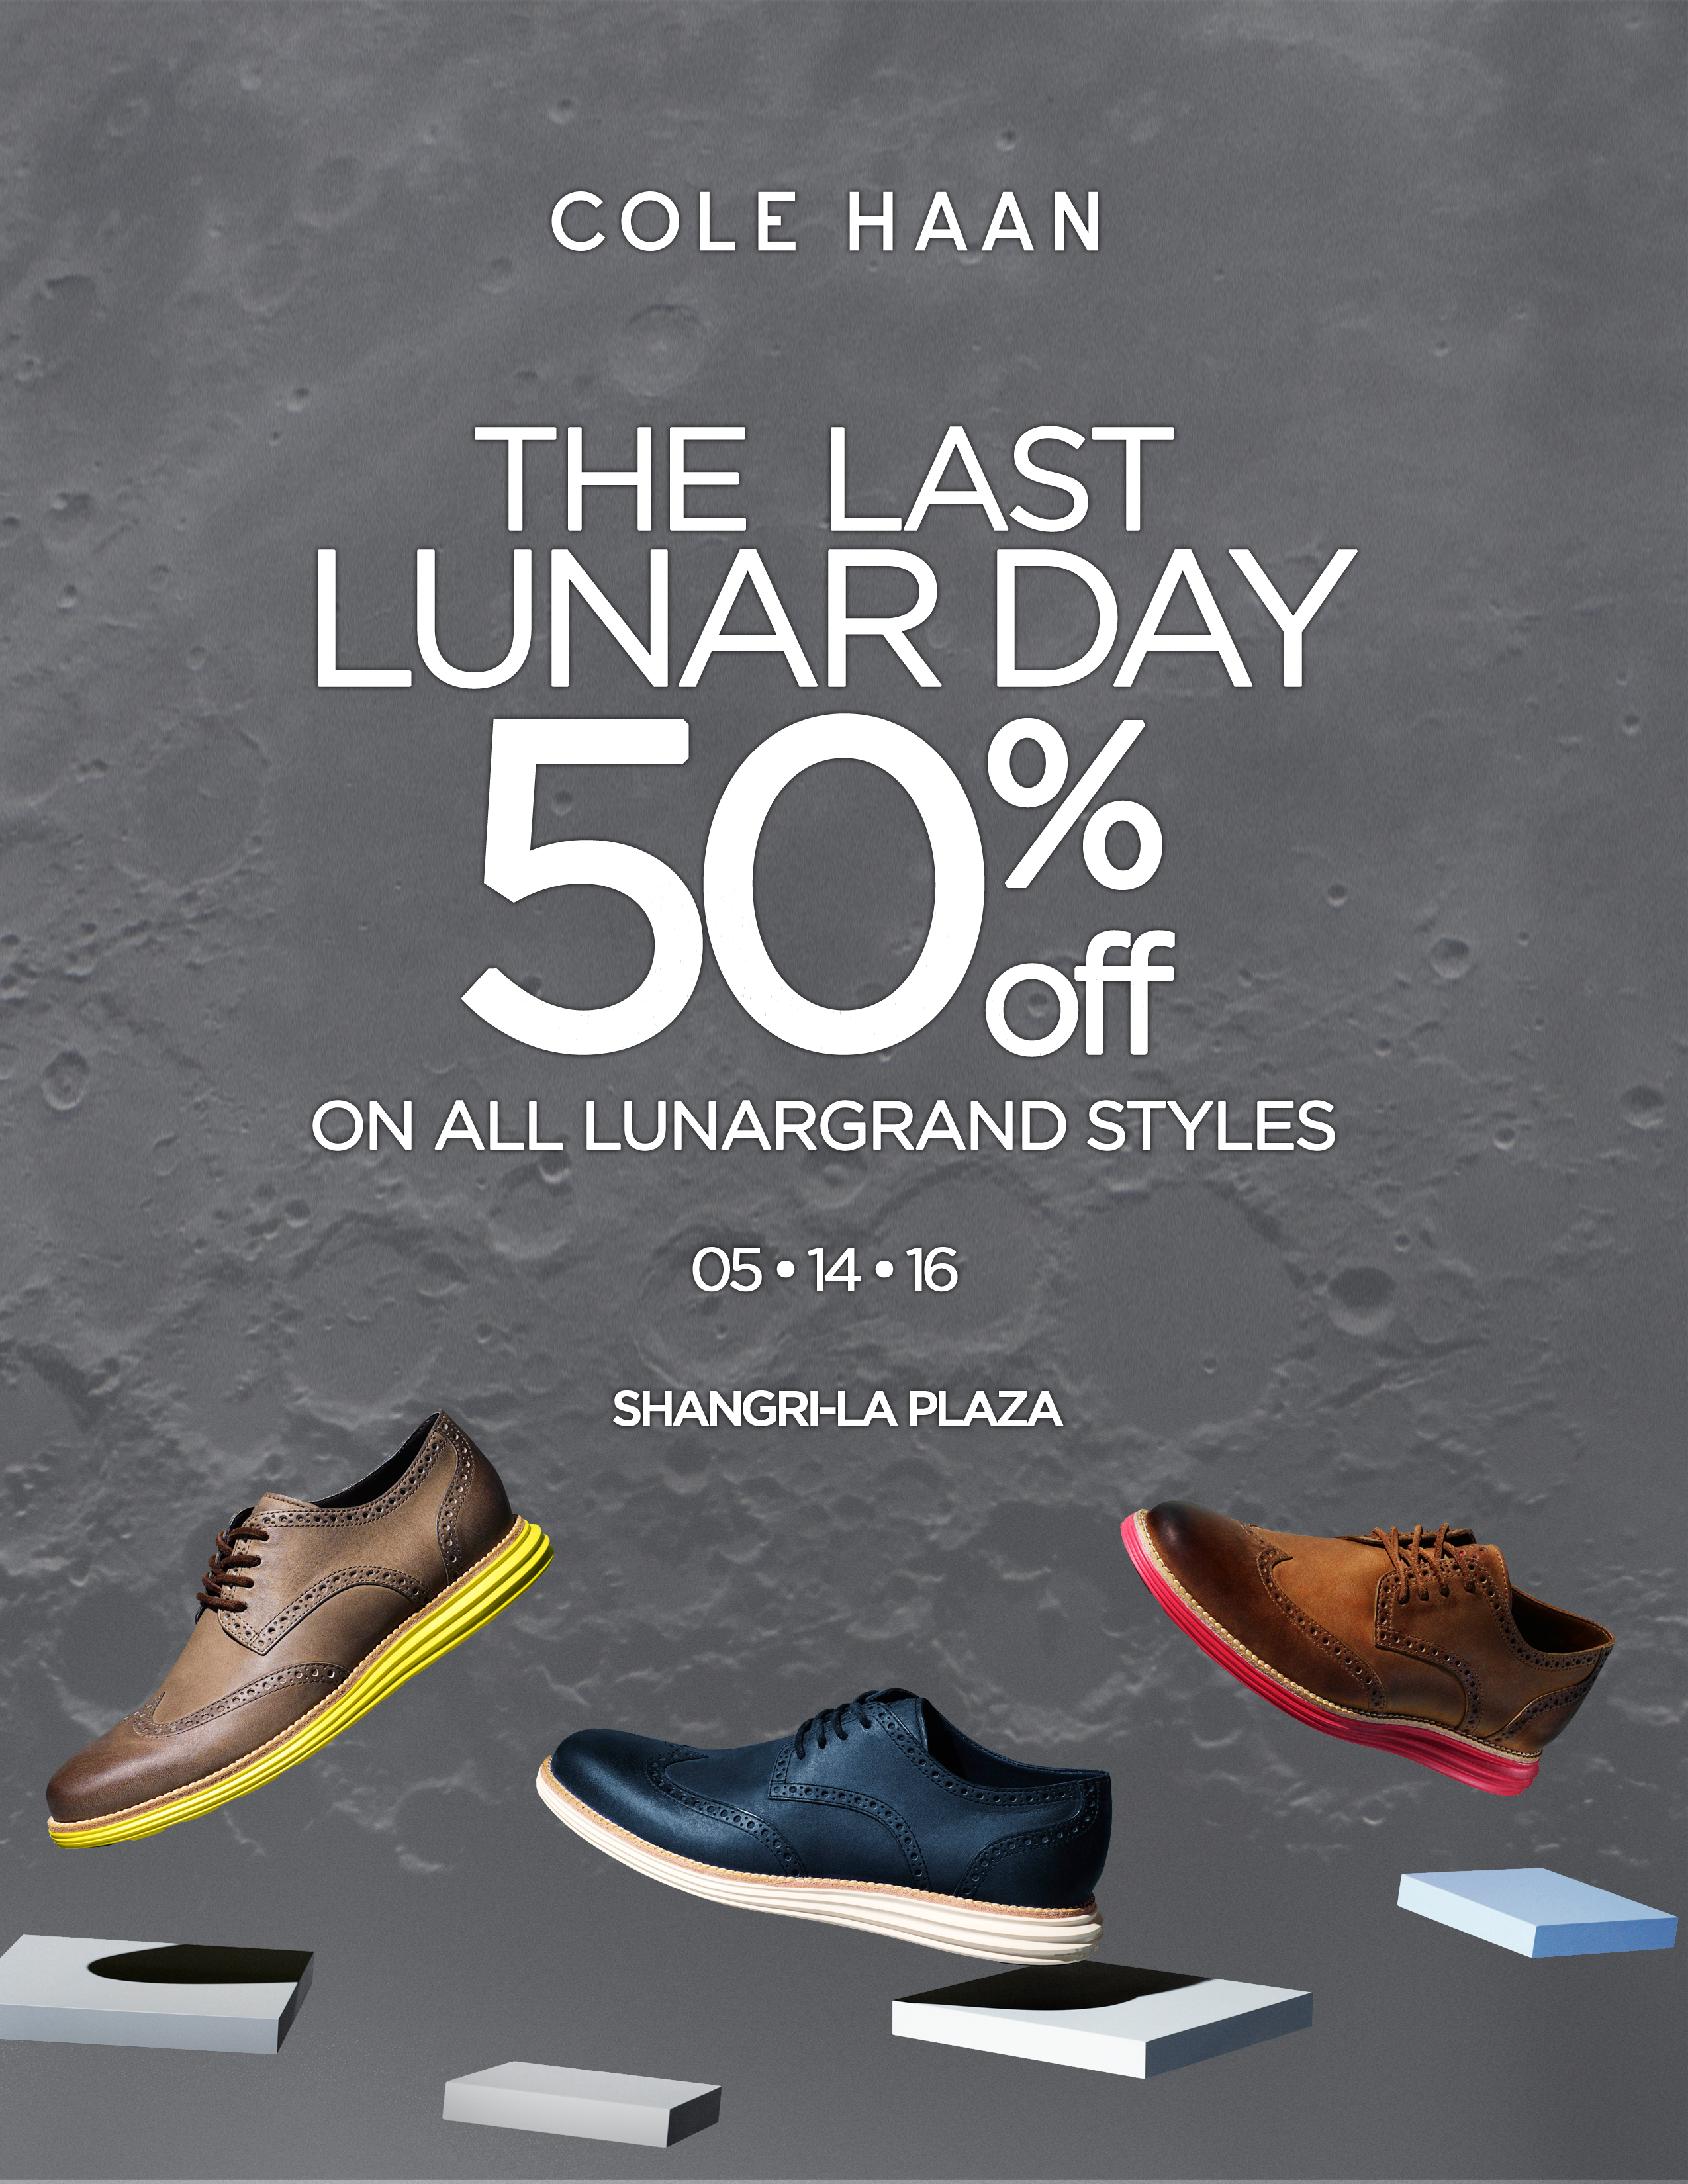 Cole Haan Last Lunar Day: May 14, 2016 